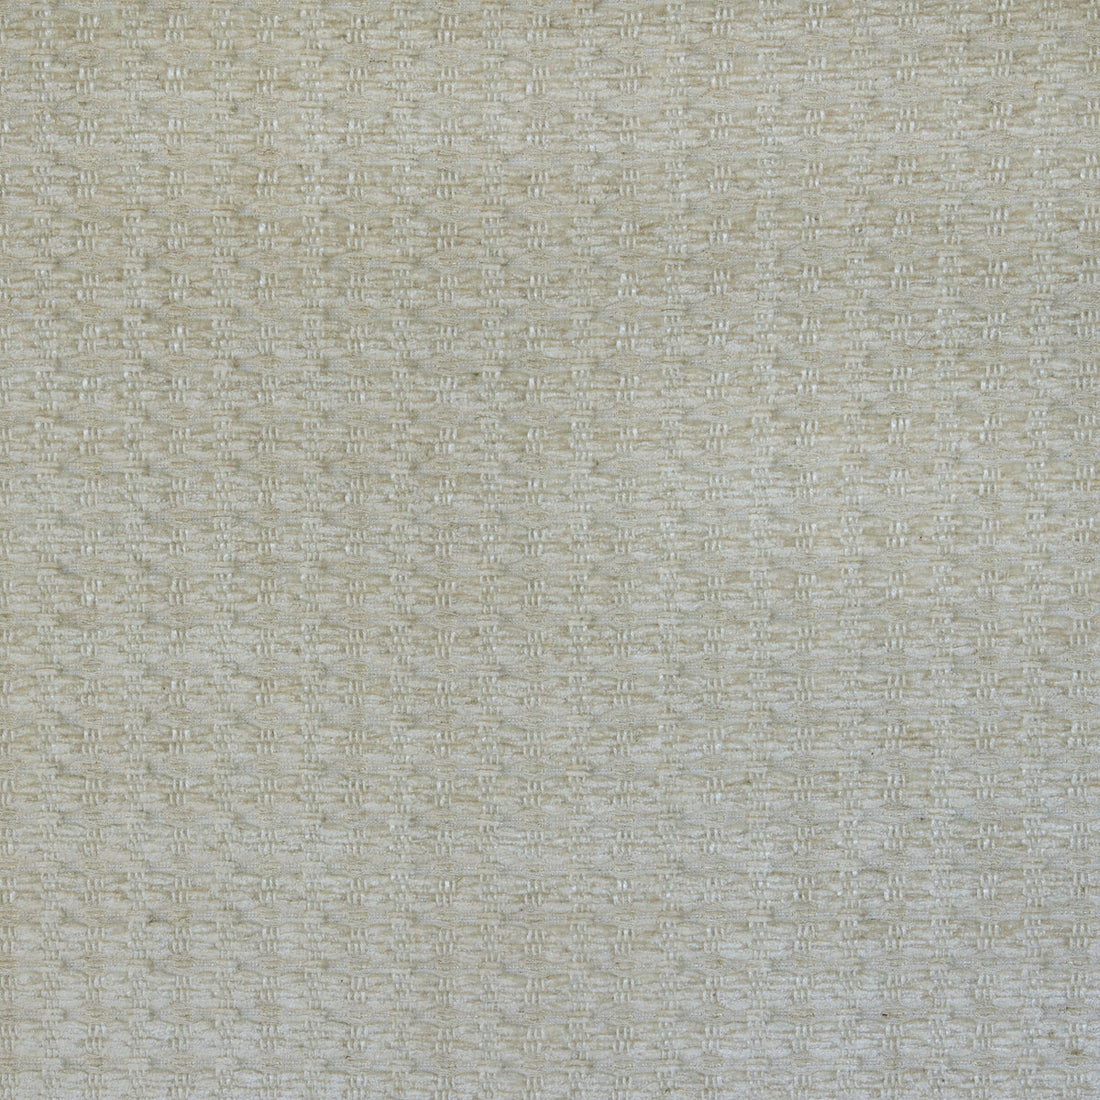 Ankh Chenille fabric in soy color - pattern 35855.1.0 - by Kravet Couture in the Windsor Smith Naila collection